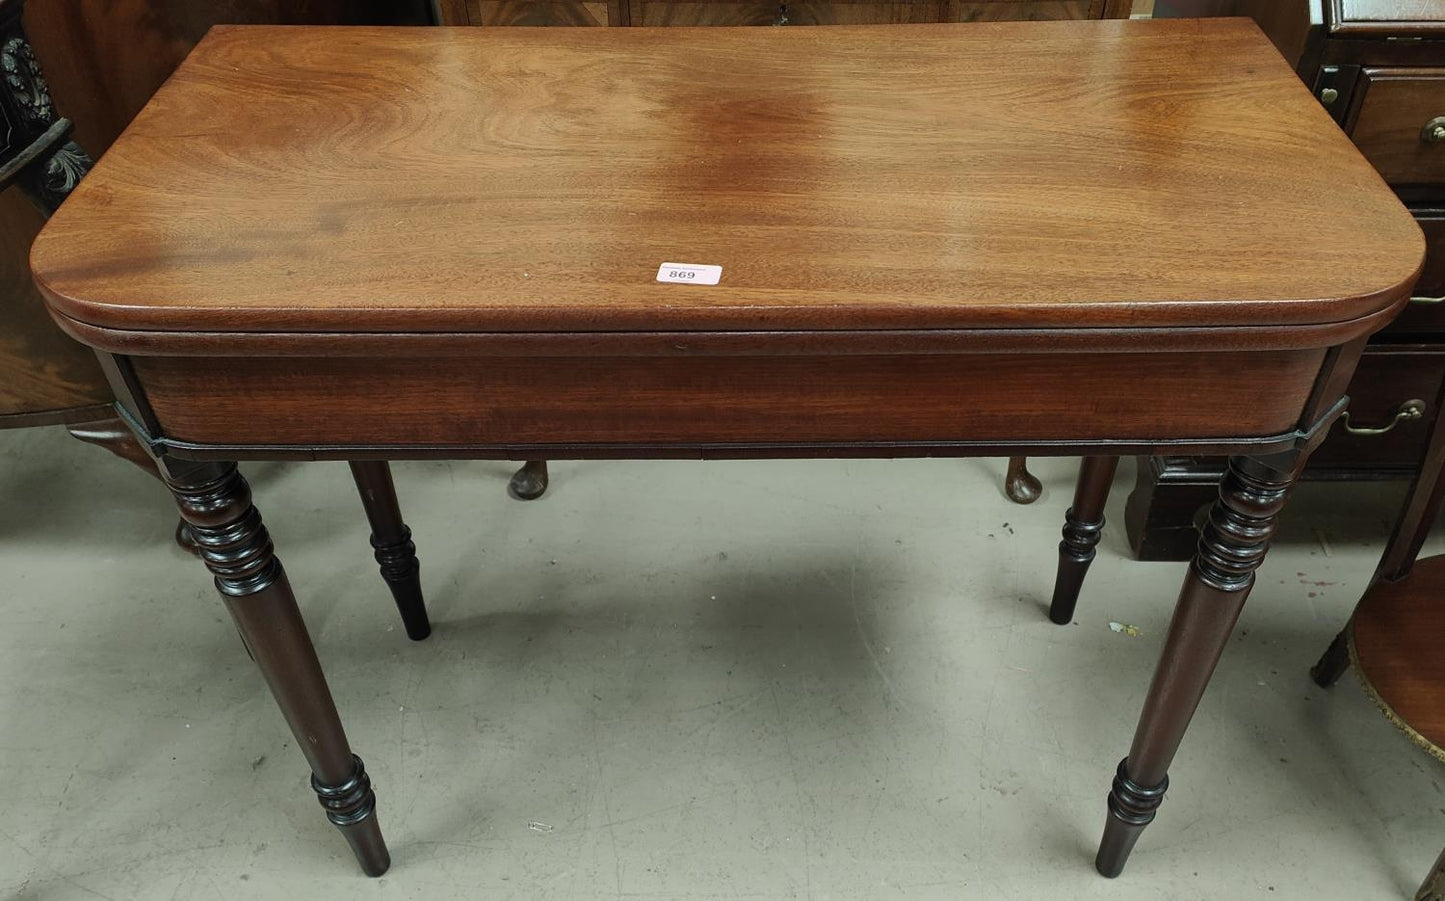 A mahogany tea table with turned legs, rounded rectangular folding top.